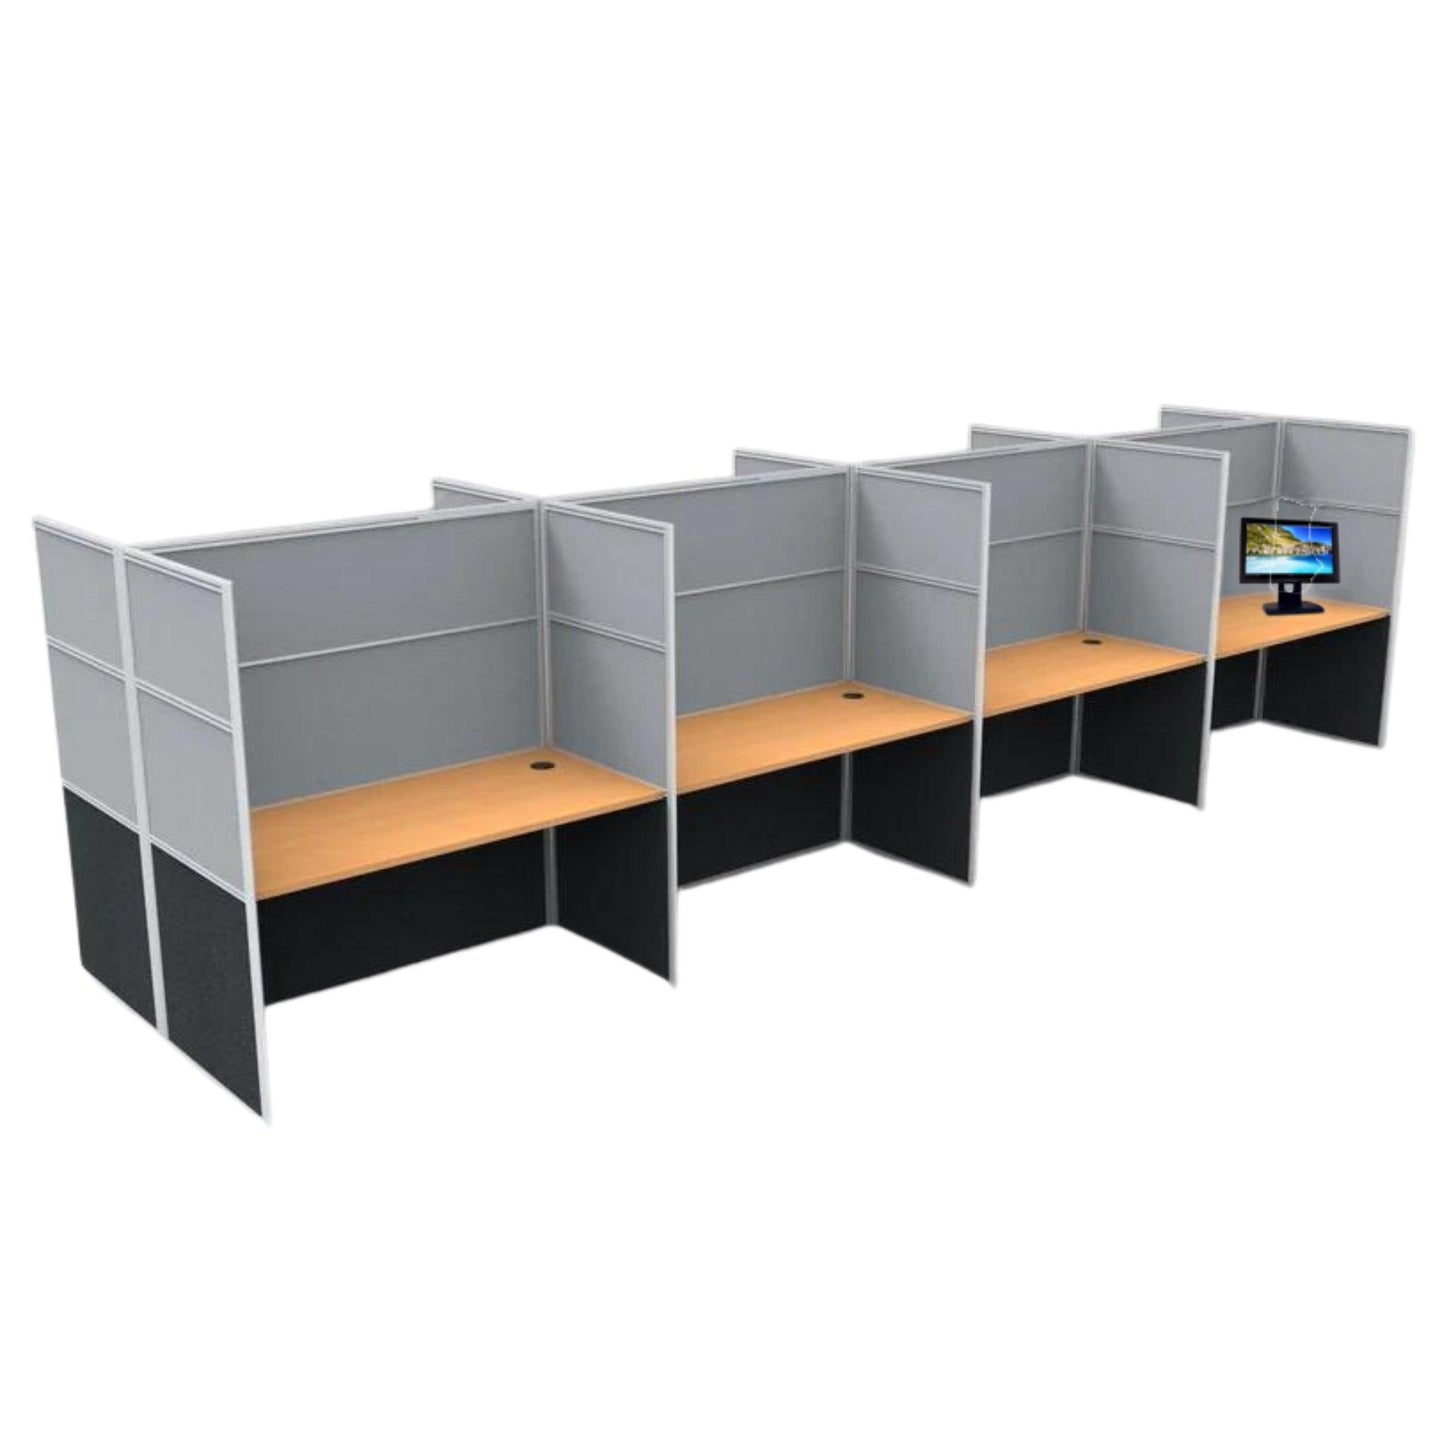 Rapid Screen 8 Person Workstation - Office Furniture Company 